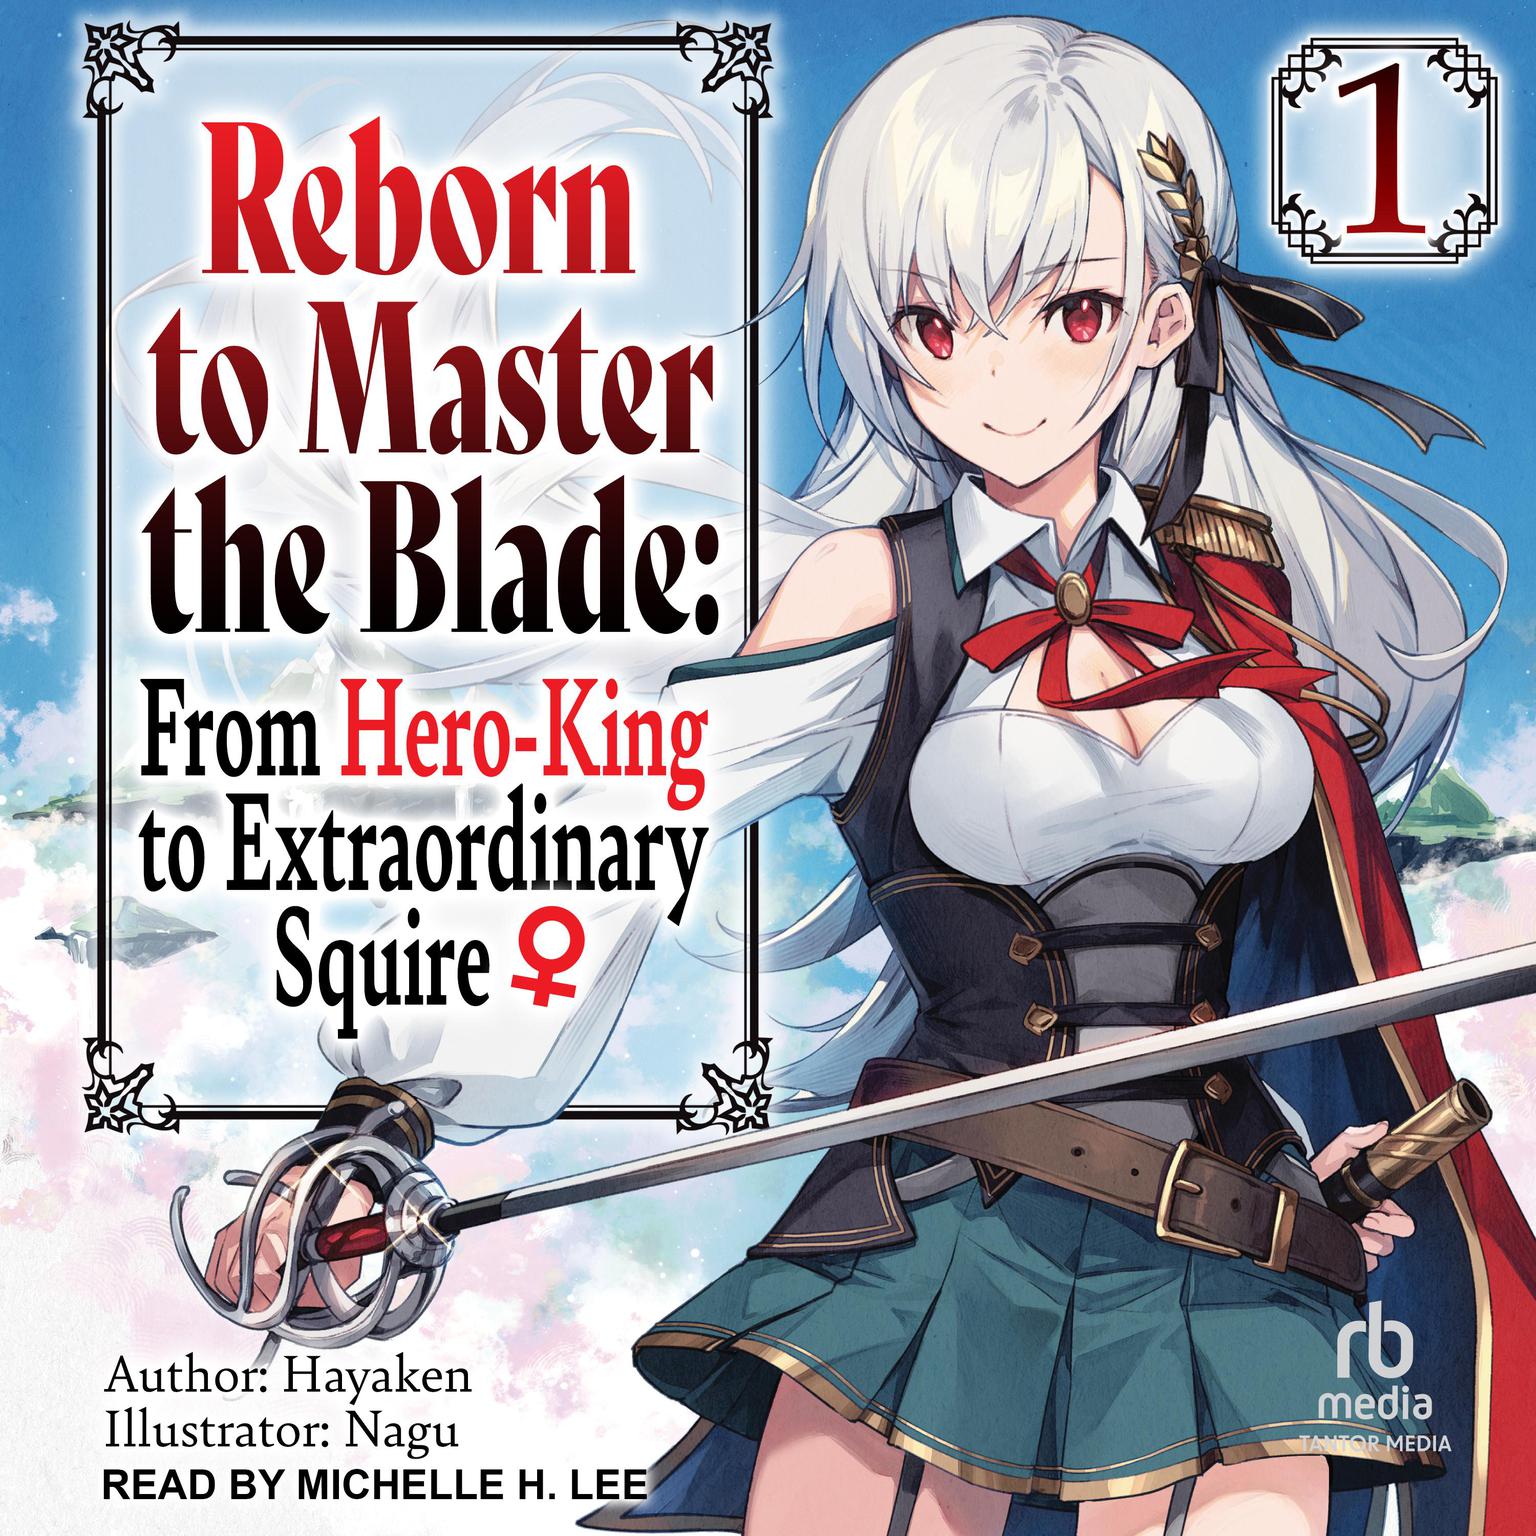 Reborn to Master the Blade: From Hero-King to Extraordinary Squire: Volume 1 Audiobook, by Hayaken 